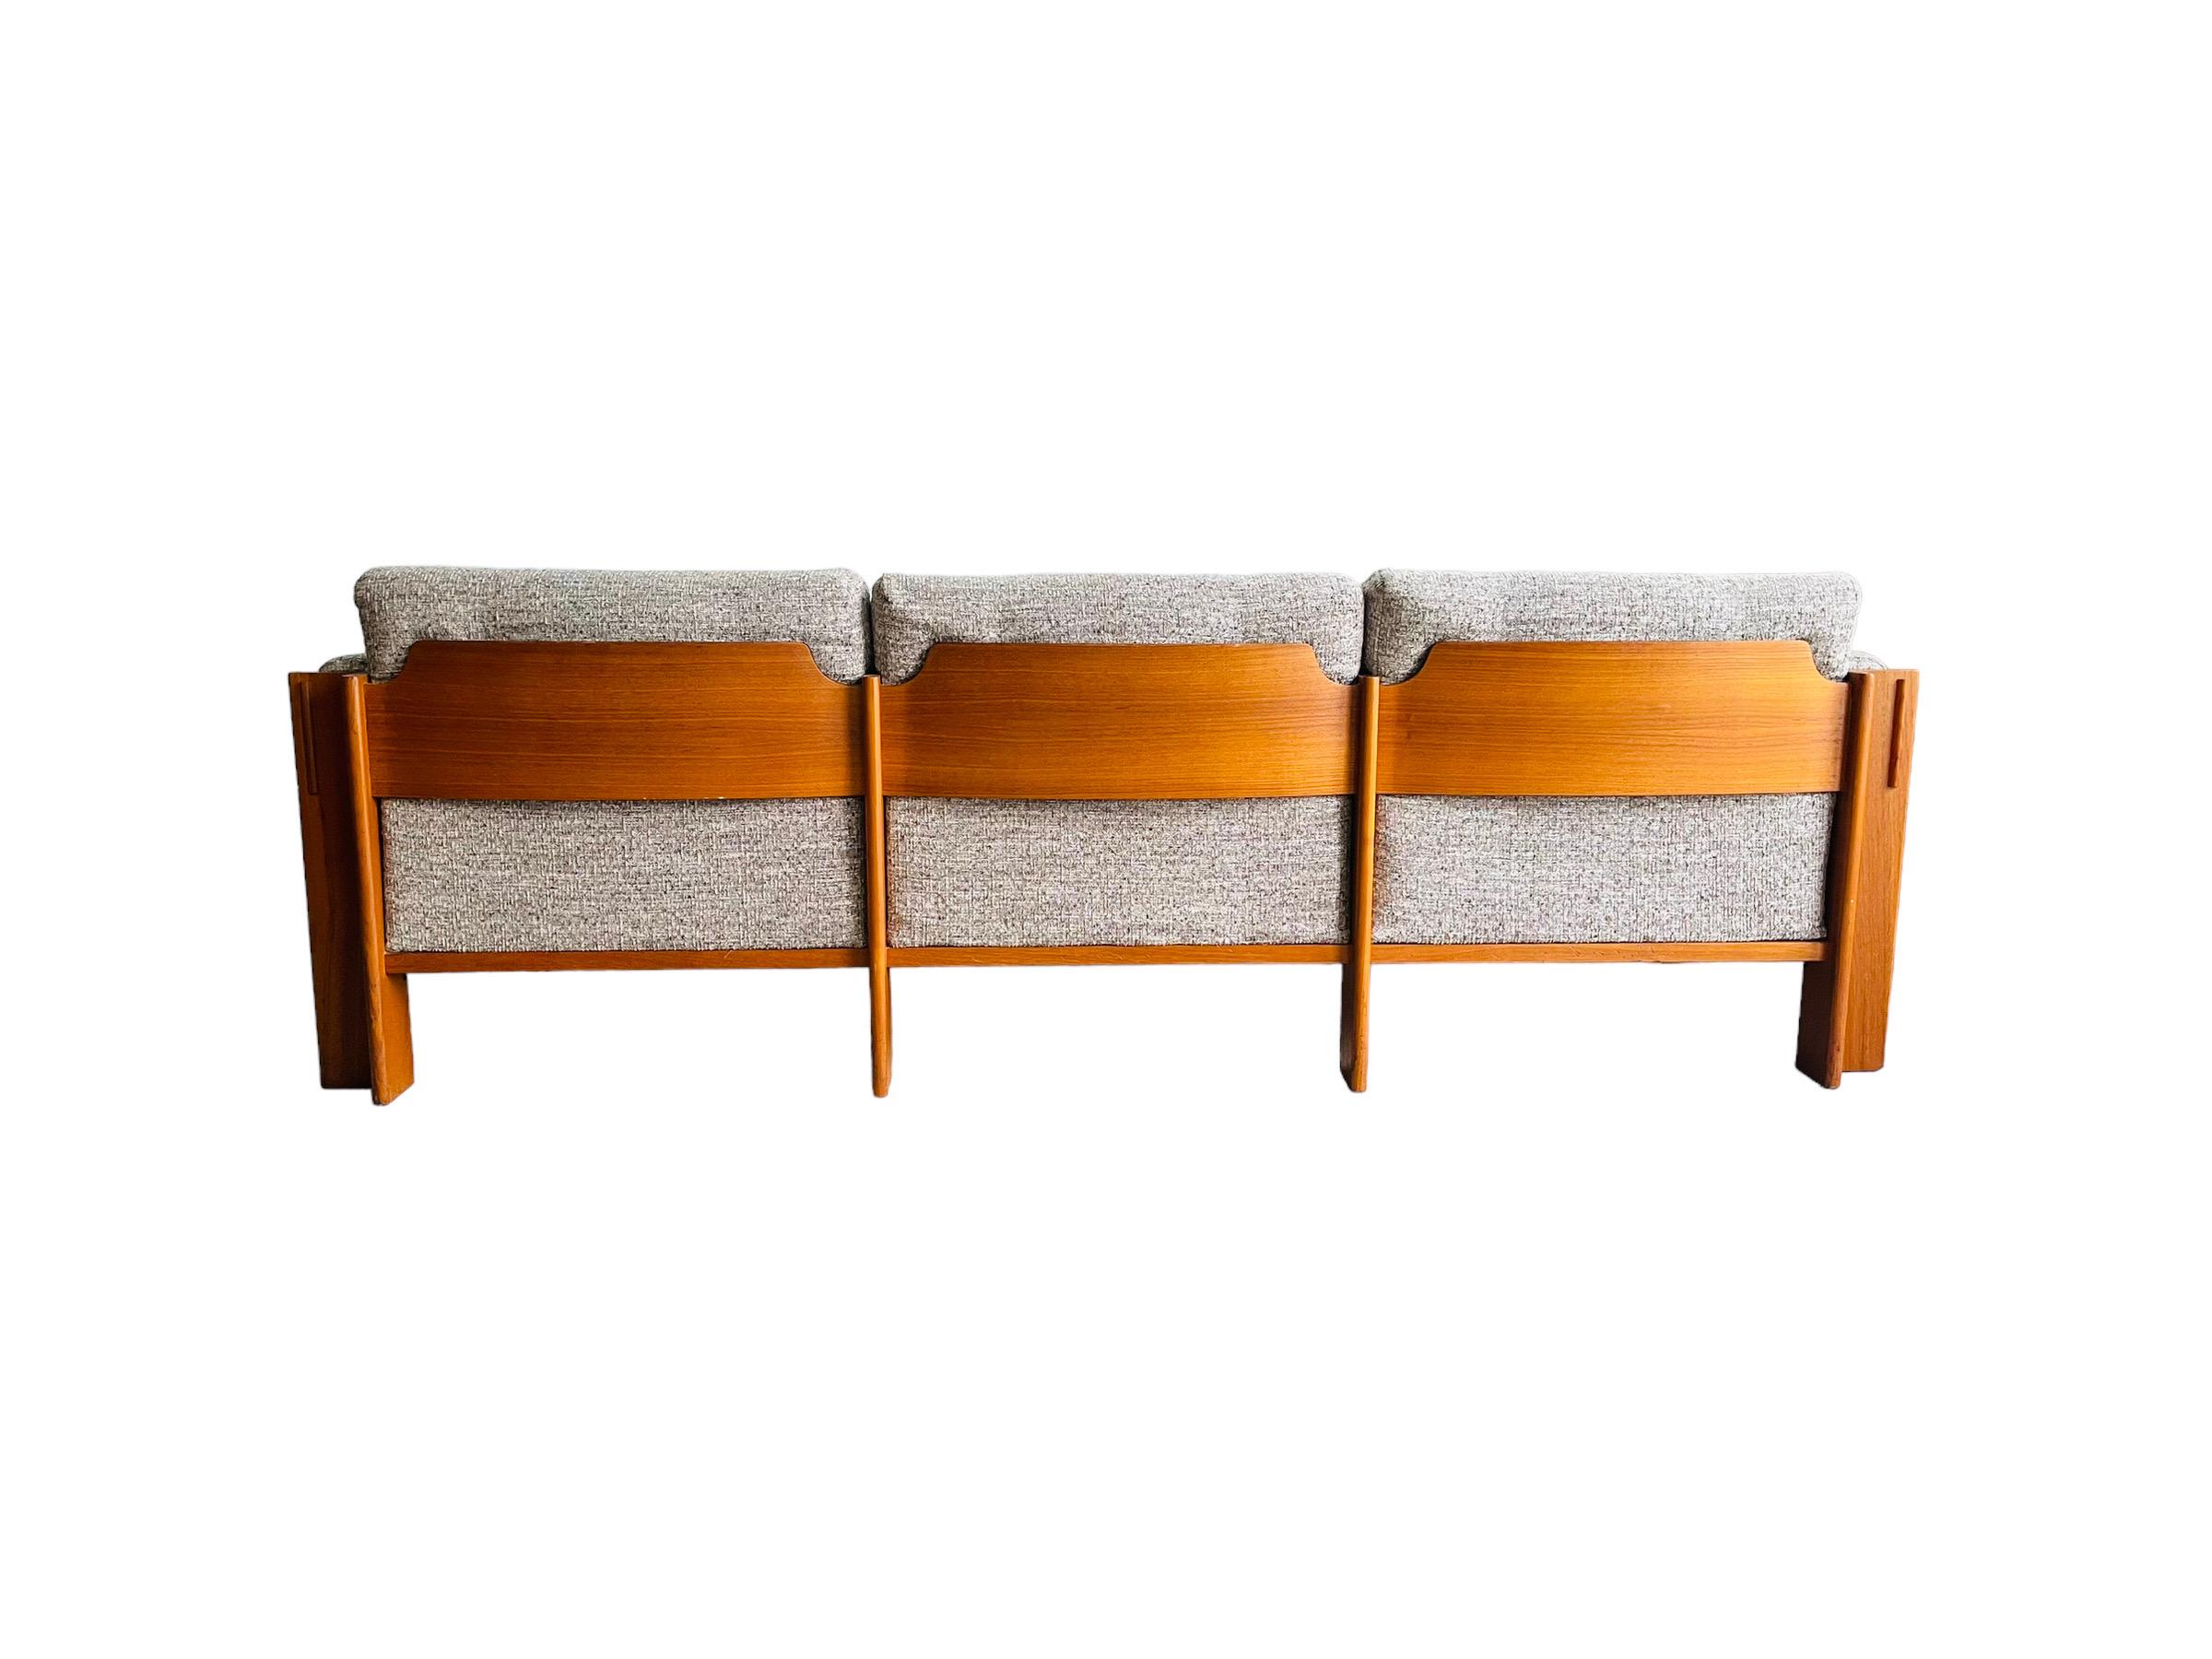 Introducing the midcentury Danish Modern Teak Sofa by JYDSK MOHOLVAERK, the epitome of timeless sophistication and comfort. This gorgeous sofa boasts a sleek teak frame that is not only sturdy and durable but also adds a touch of elegance to any